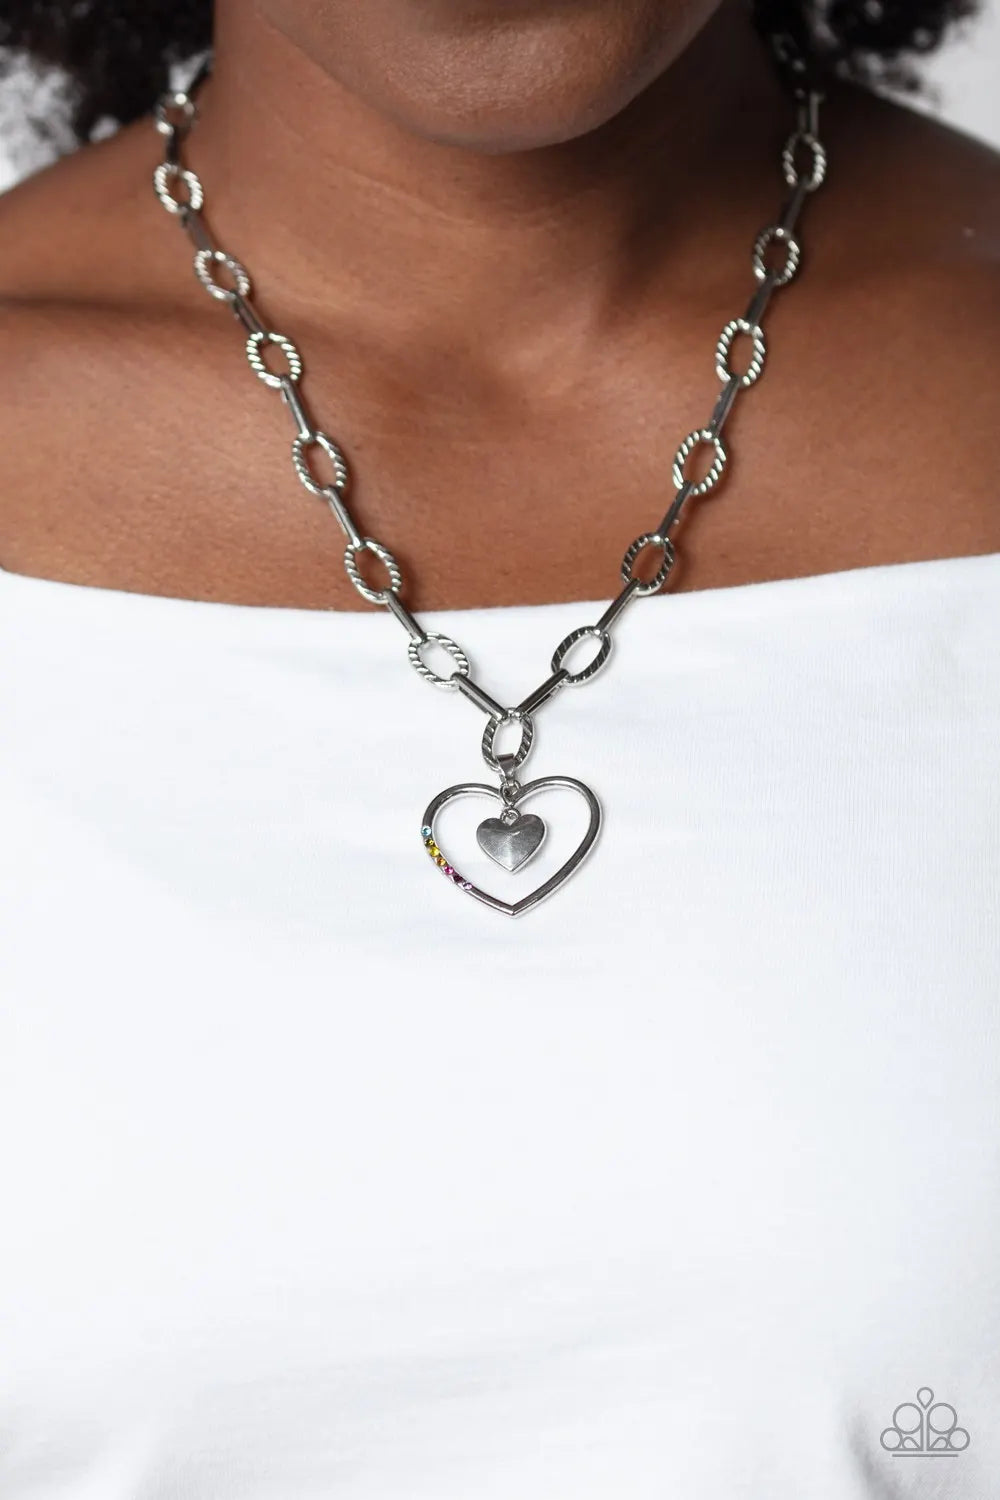 Refulgent Heart - Multi Color and Silver Necklace - Paparazzi Accessories - Textured ovals and elongated silver links lead the eye down to an oversized, airy, silver heart frame. Encrusted along one of the curves of the silver heart, dainty rhinestones glimmer for a subtle pop of color. Dangling inside the oversized heart frame, a silver heart pendant swings for a romantic finish.